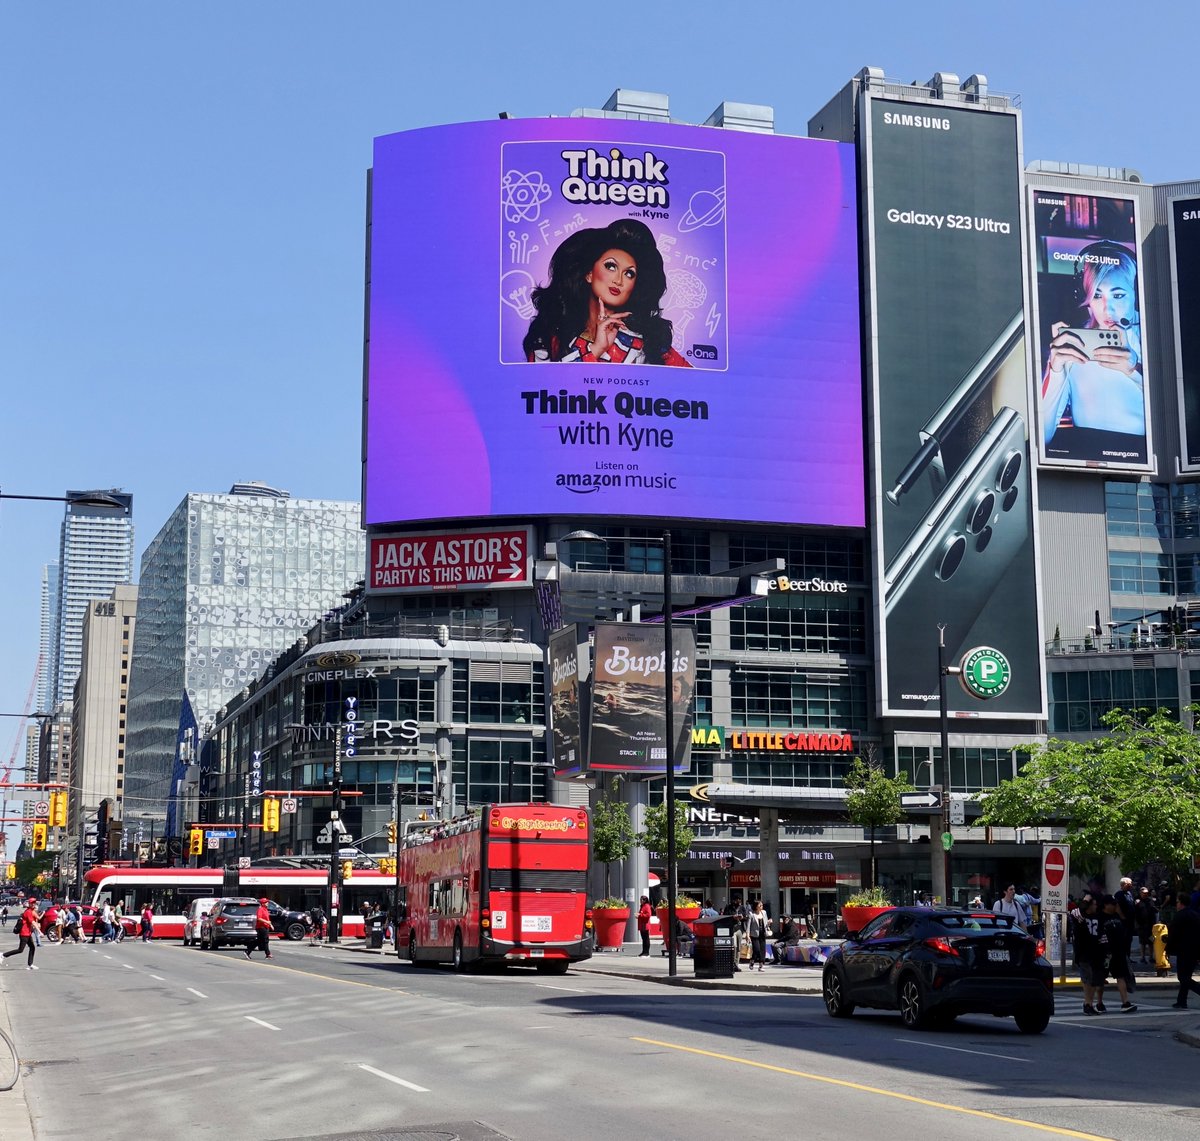 Think Queen on the BIG screen at Yonge and Dundas Square! The complete first season is out and you won’t want to miss it. From climate change to sexuality science, Kyne and her guests dive into topics for every listener. Stream all 8 episodes now via amazon.ca/thinkqueen